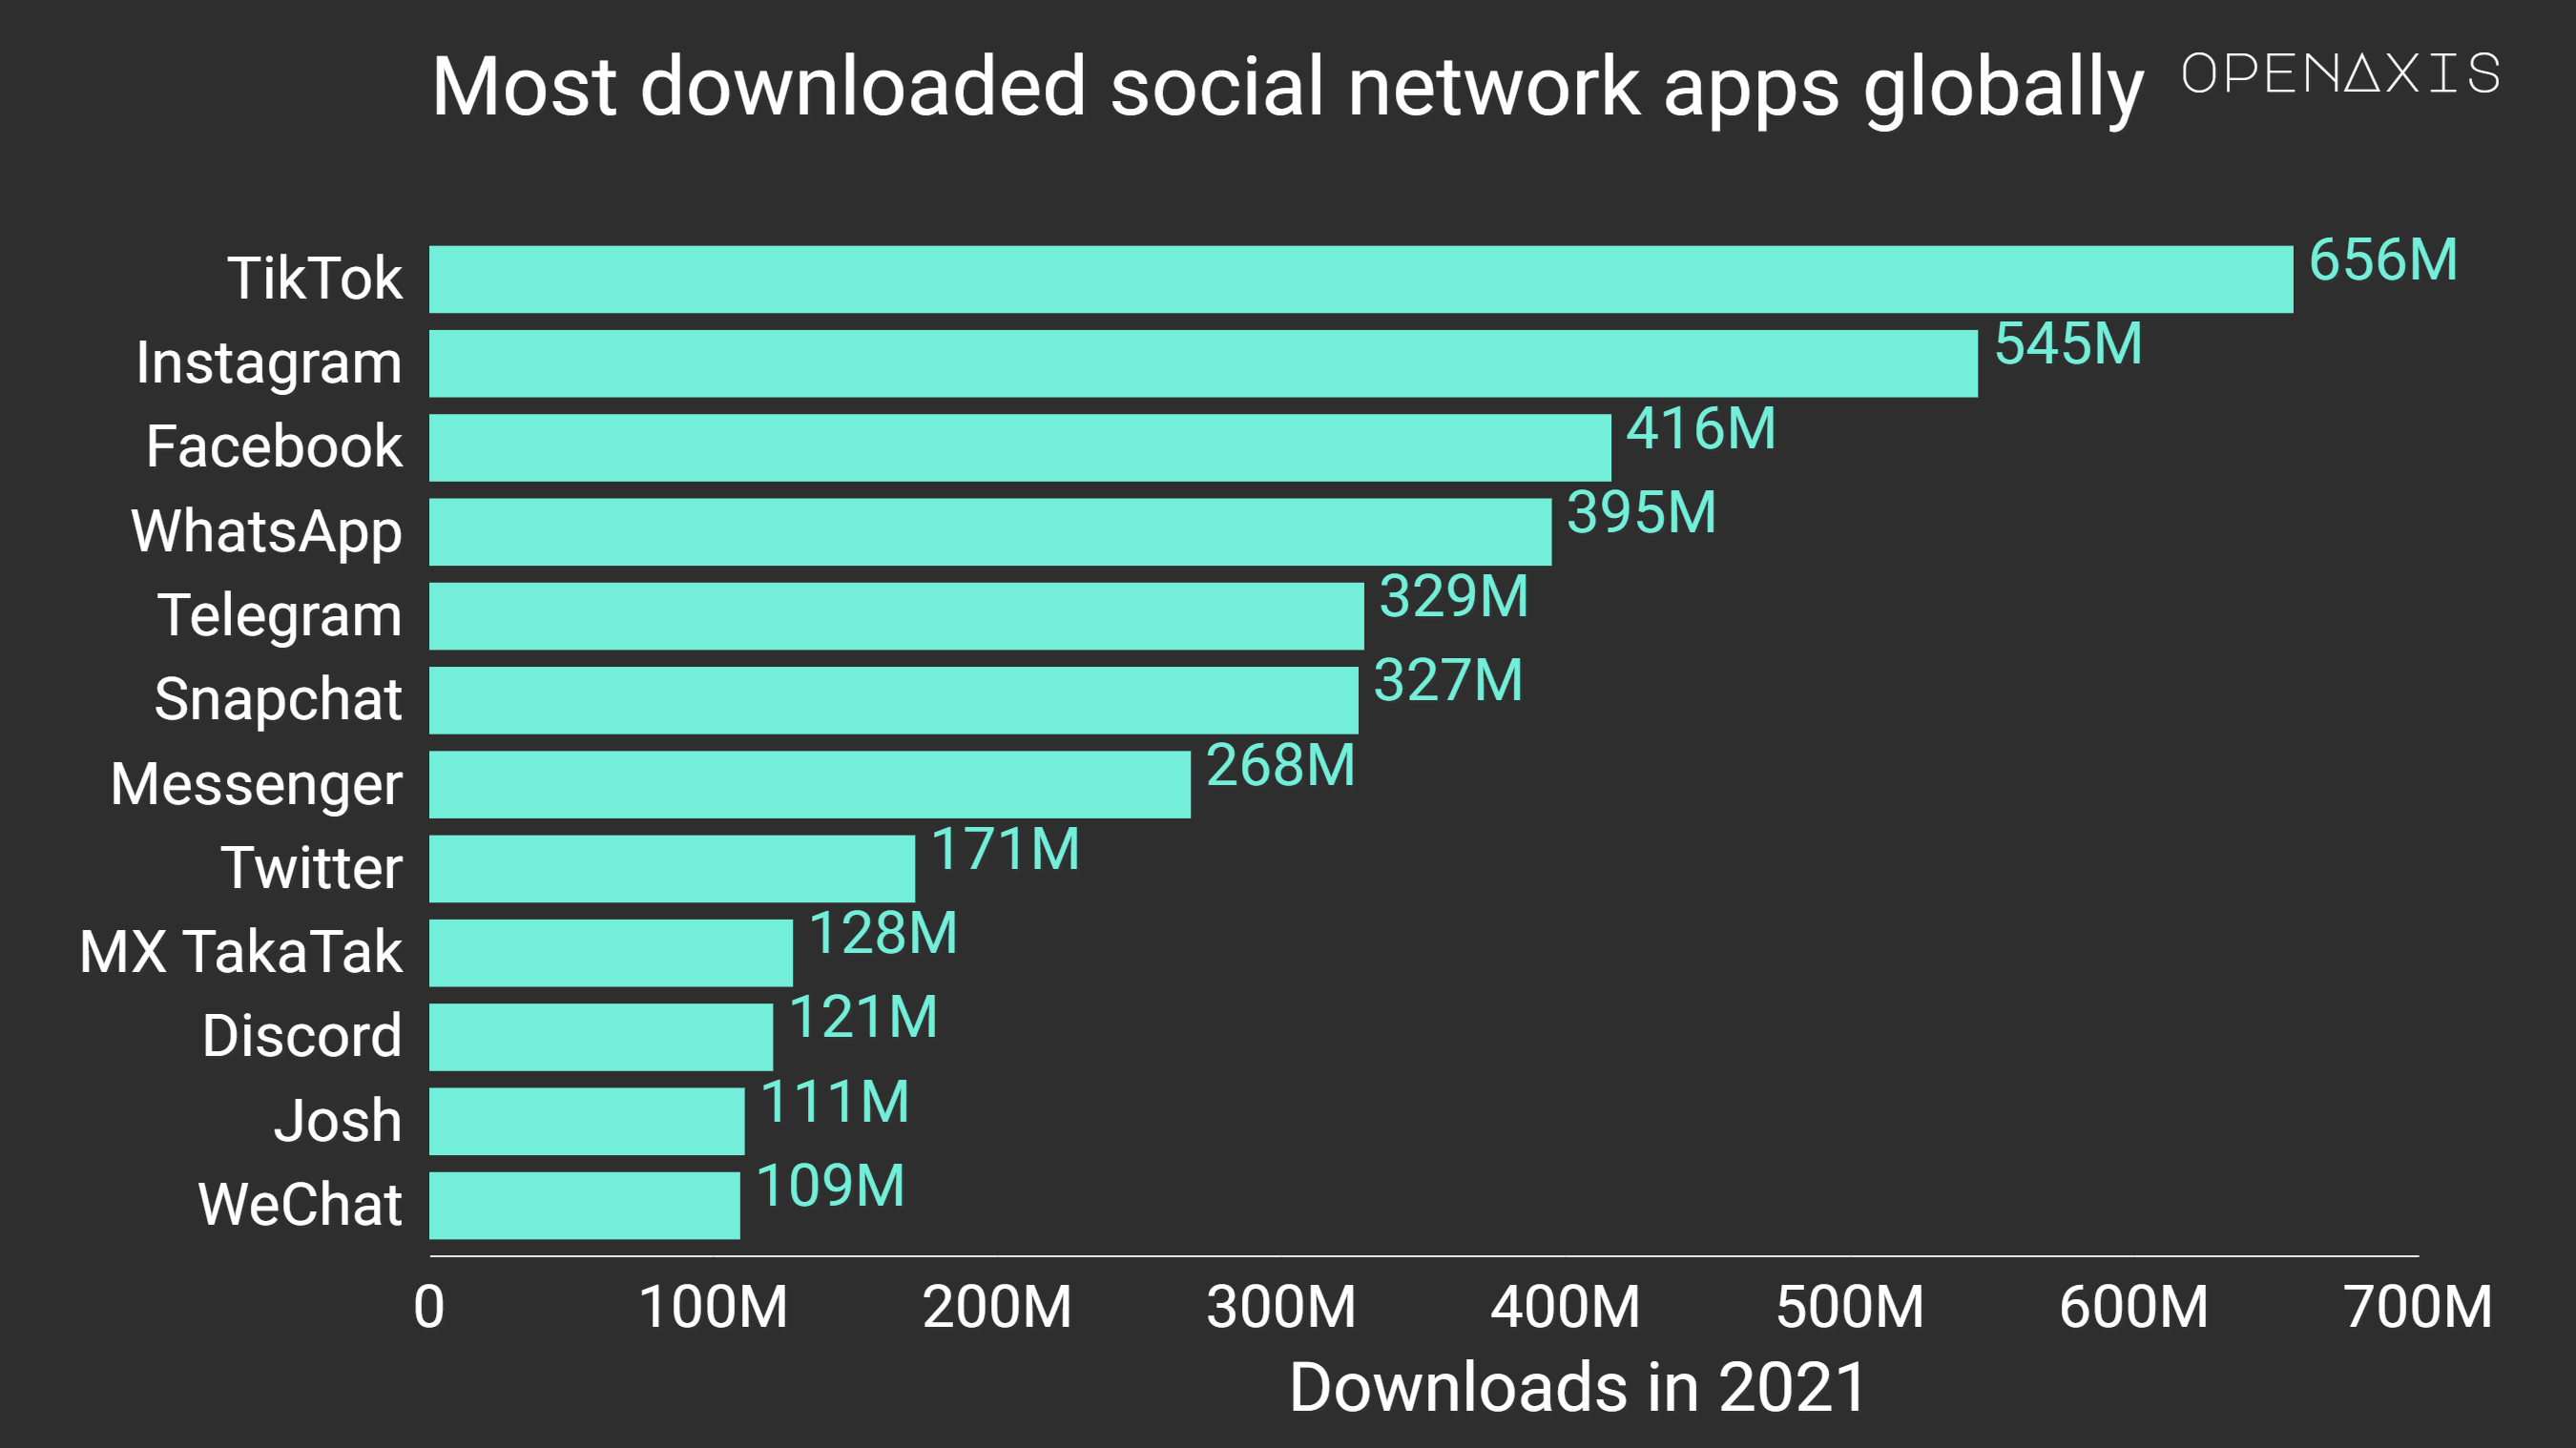 <p>The top six most downloaded social network apps worldwide in 2021 are also the most downloaded apps across all categories.</p><p><span data-index="0" data-denotation-char data-id="0" data-value="&lt;a href=&quot;/search?q=%23socialnetwork&quot; target=_self&gt;#socialnetwork" data-link="/search?q=%23socialnetwork">﻿<span contenteditable="false"><span></span><a href="/search?q=%23socialnetwork" target="_self">#socialnetwork</a></span>﻿</span> <span data-index="0" data-denotation-char data-id="0" data-value="&lt;a href=&quot;/search?q=%23apps&quot; target=_self&gt;#apps" data-link="/search?q=%23apps">﻿<span contenteditable="false"><span></span><a href="/search?q=%23apps" target="_self">#apps</a></span>﻿</span> <span data-index="0" data-denotation-char data-id="0" data-value="&lt;a href=&quot;/search?q=%23mobile&quot; target=_self&gt;#mobile" data-link="/search?q=%23mobile">﻿<span contenteditable="false"><span></span><a href="/search?q=%23mobile" target="_self">#mobile</a></span>﻿</span> </p><p>Source: <a href="/data/3646" target="_blank">Apptopia</a></p>